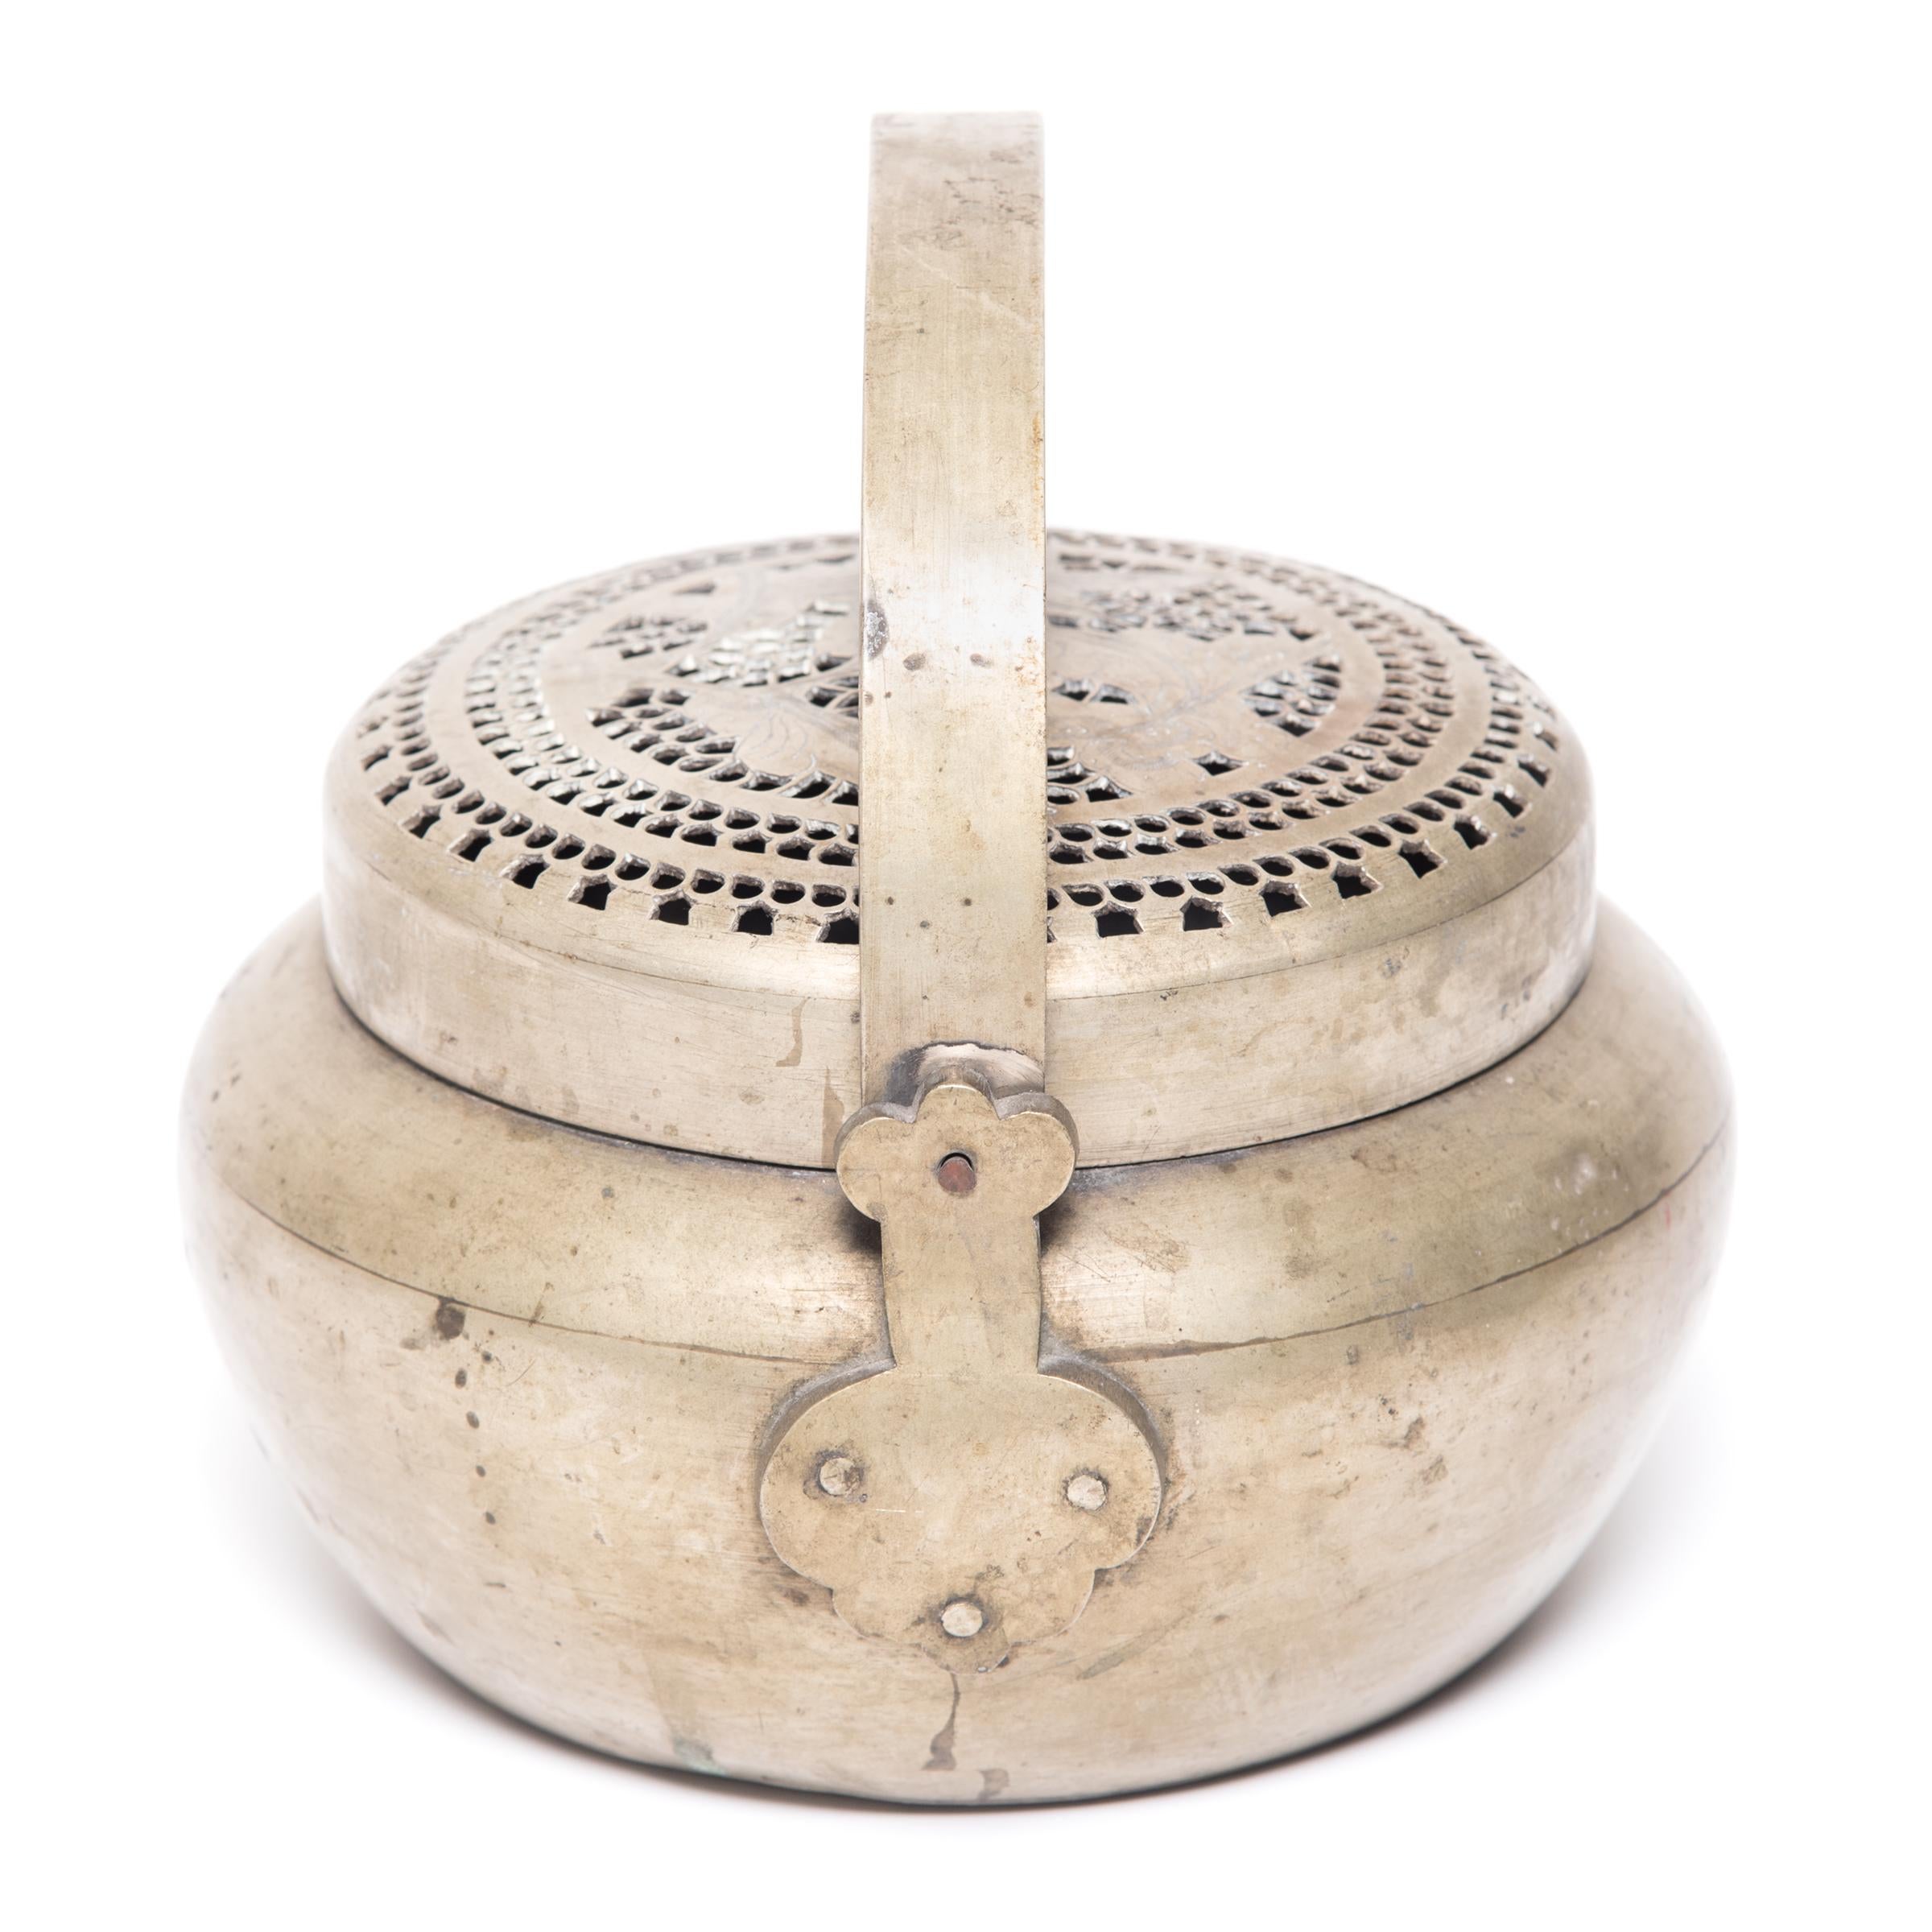 This 19th century handcrafted bronze hand warmer would have been owned by a woman of means and filled with coals so she could warm her hands on cold winter nights. The top is beautifully pierced with a flowering bud design. Surrounding the flowers